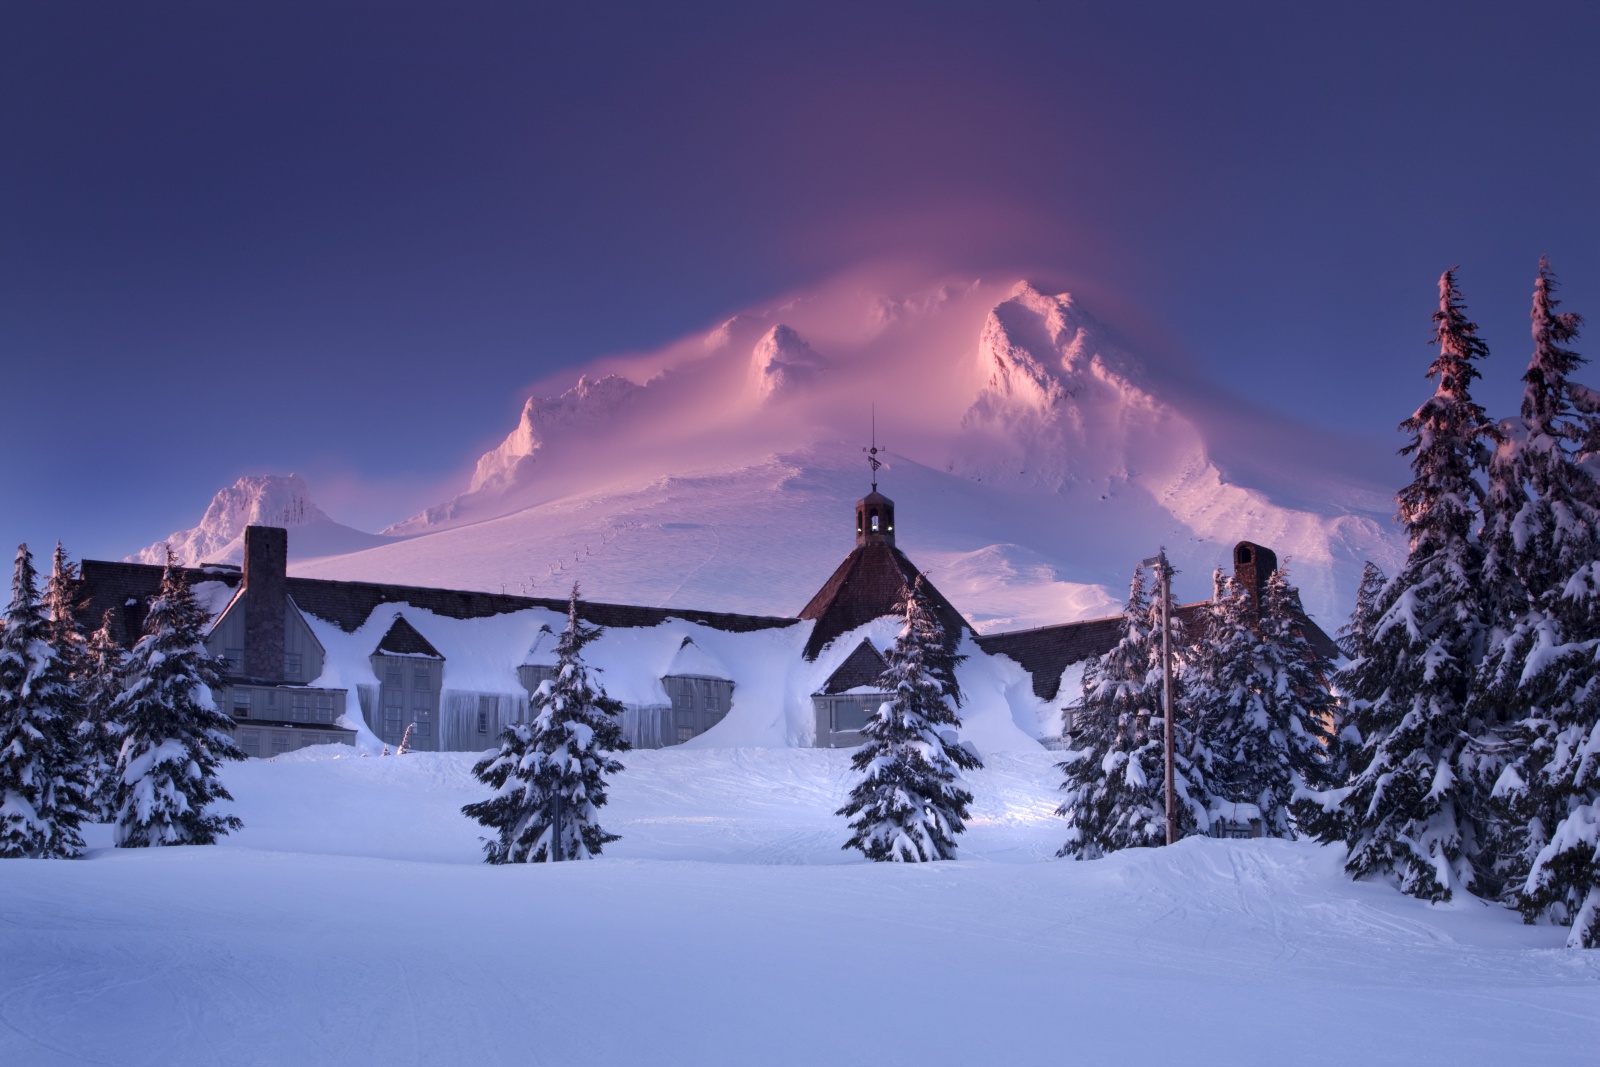 Timberline Lodge - The Hotel From "The Shining" Movie